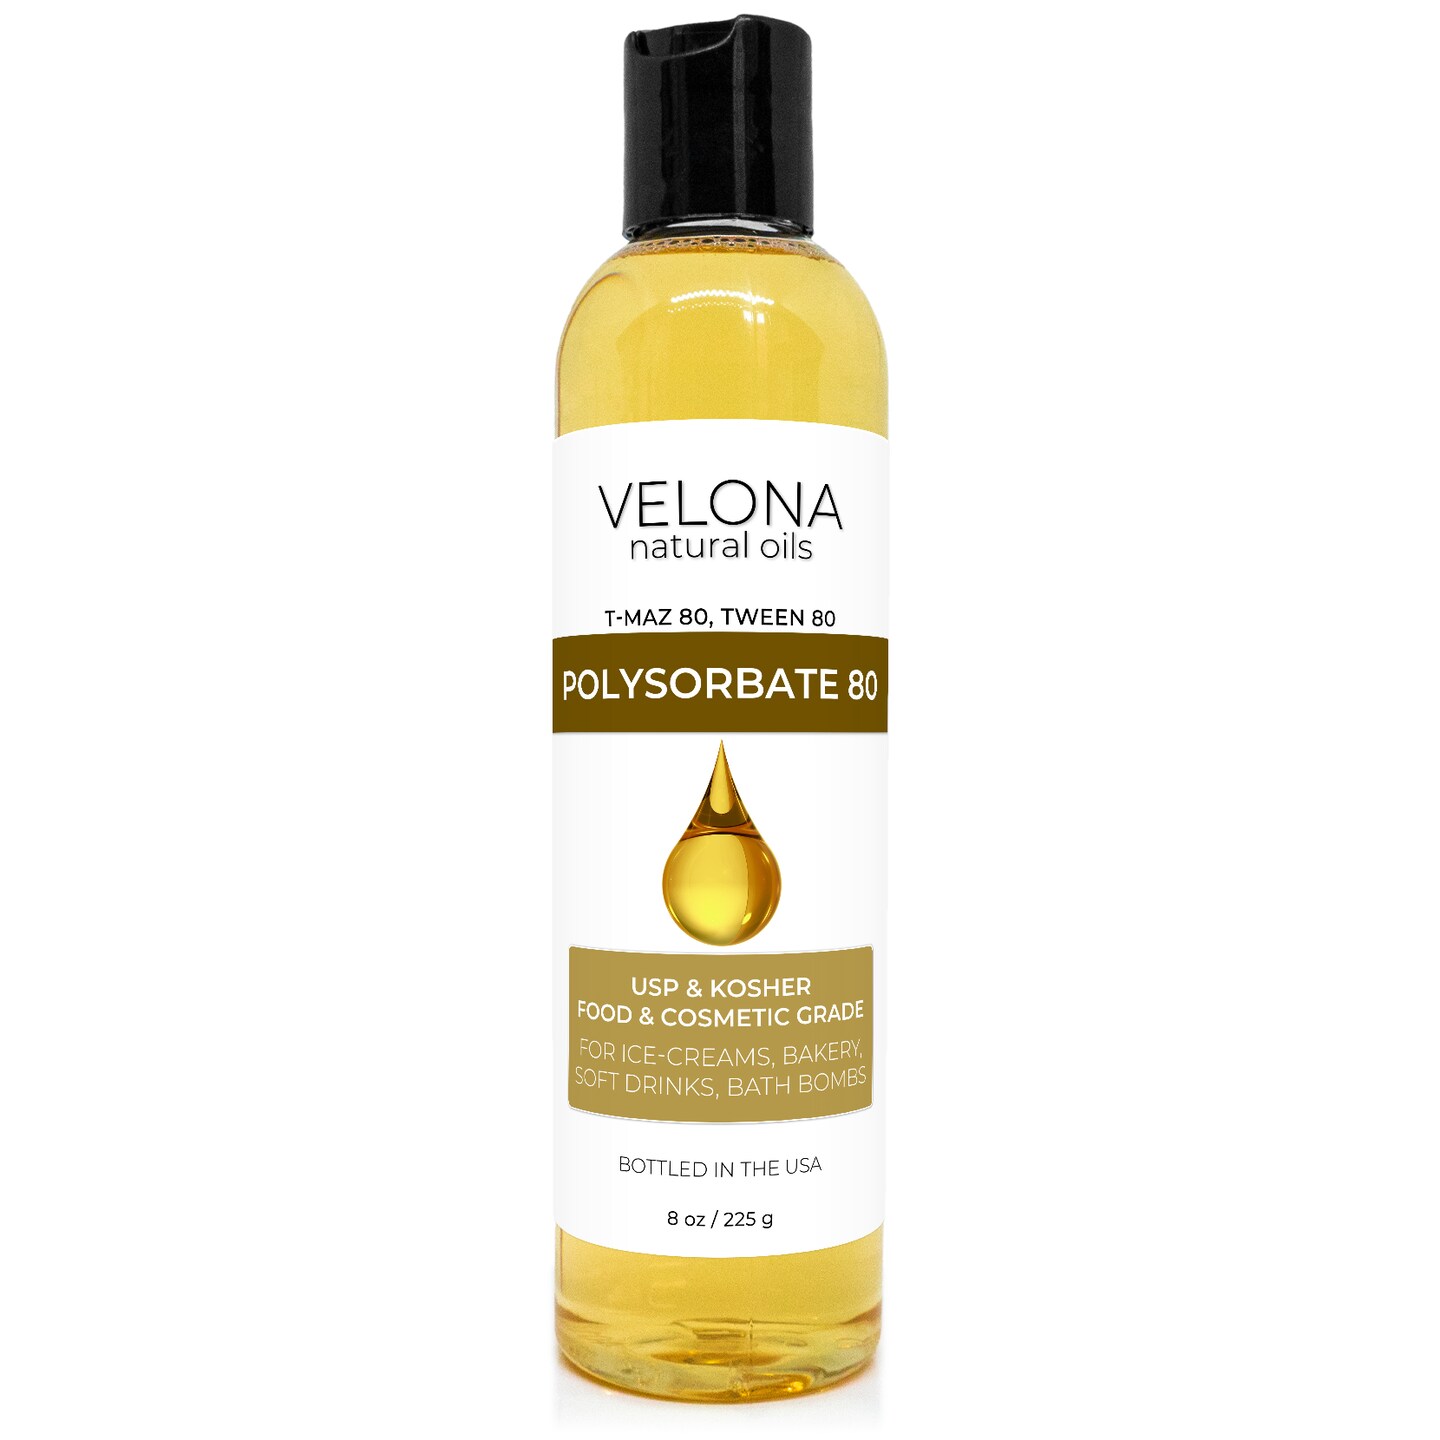 Polysorbate 80 by Velona 8 oz | Solubilizer, Food &#x26; Cosmetic Grade | All Natural for Cooking, Skin Care and Bath Bombs, Sprays, Foam Maker | Use Today - Enjoy Results